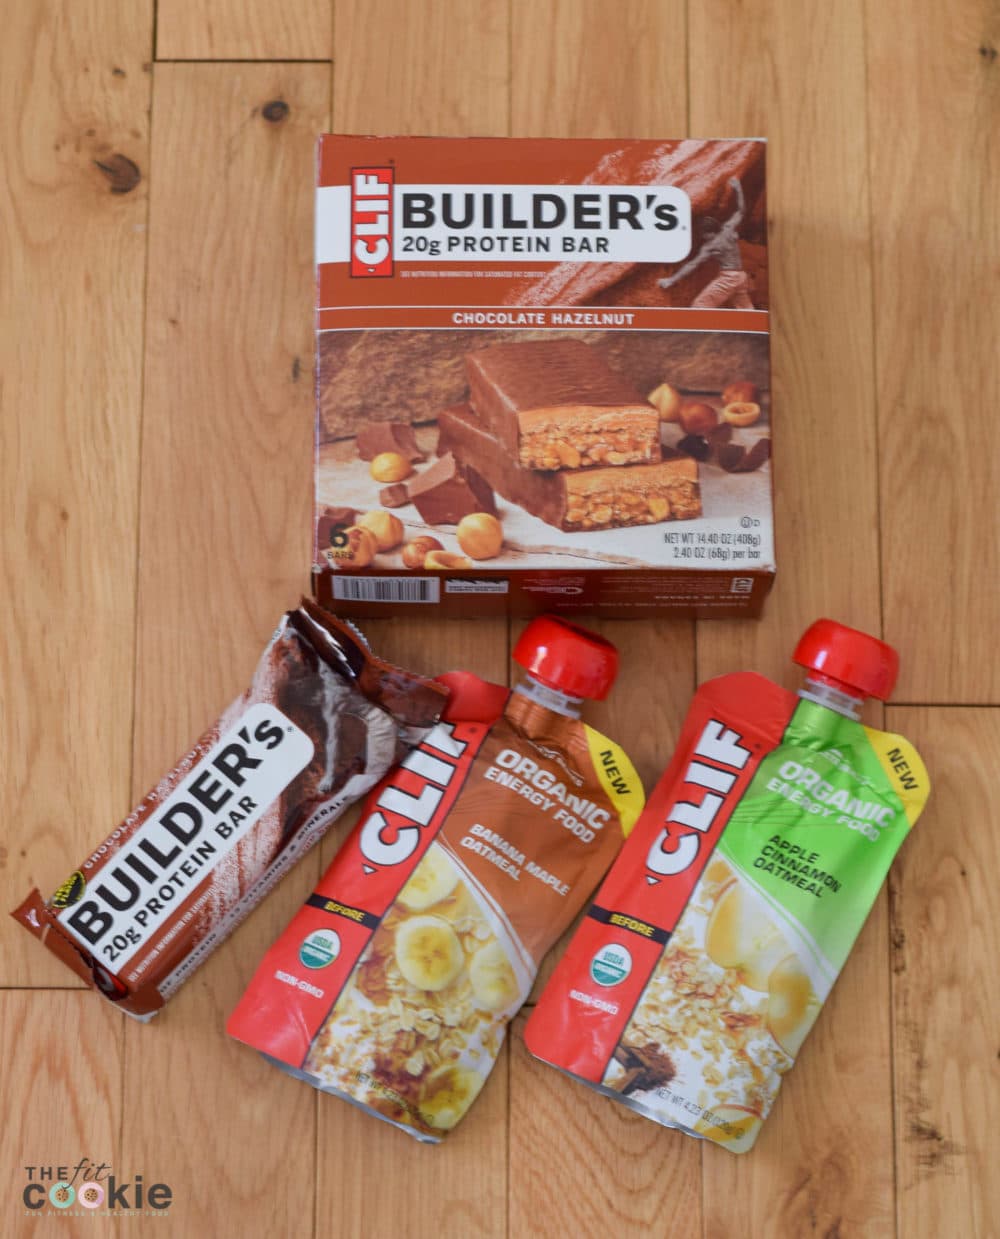 Struggling to stay active? Here's 5 get fit tips for every day energy and fitness with Bob Seebohar and @CLIFBar! - #ad @TheFitCookie #feedyouradventure #fitness